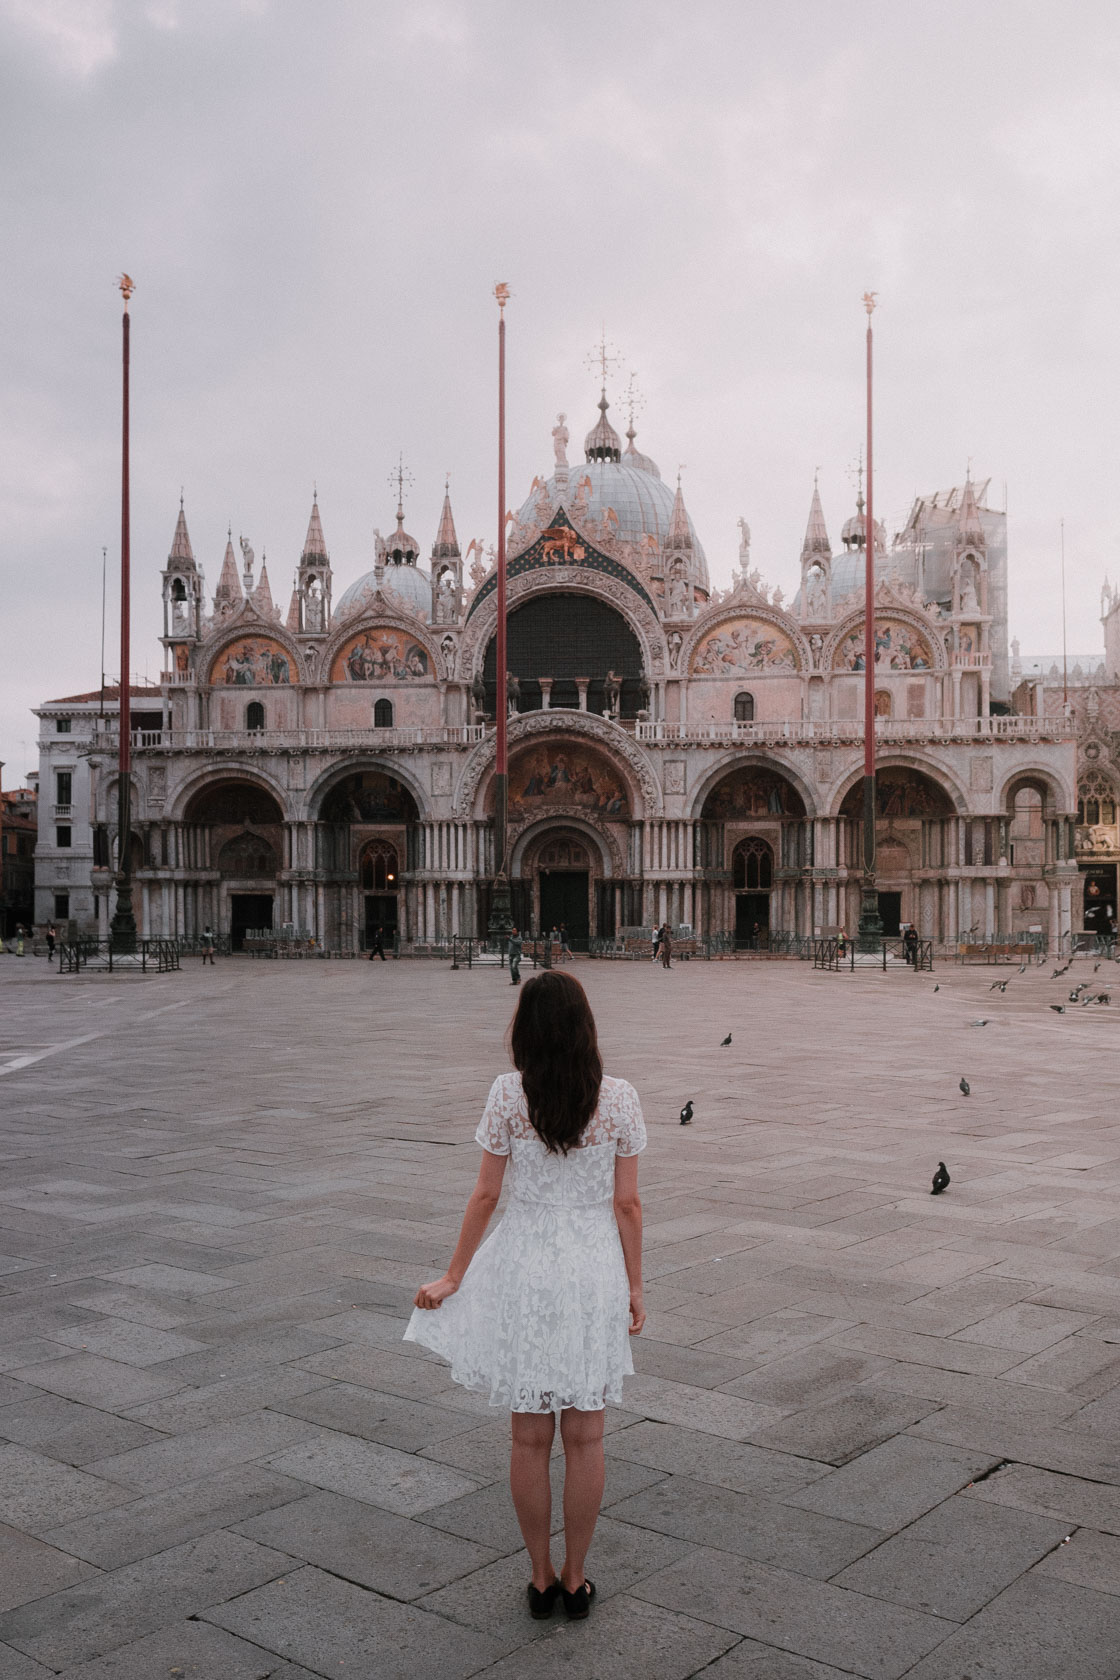 Saint Mark's Cathedral in Venice